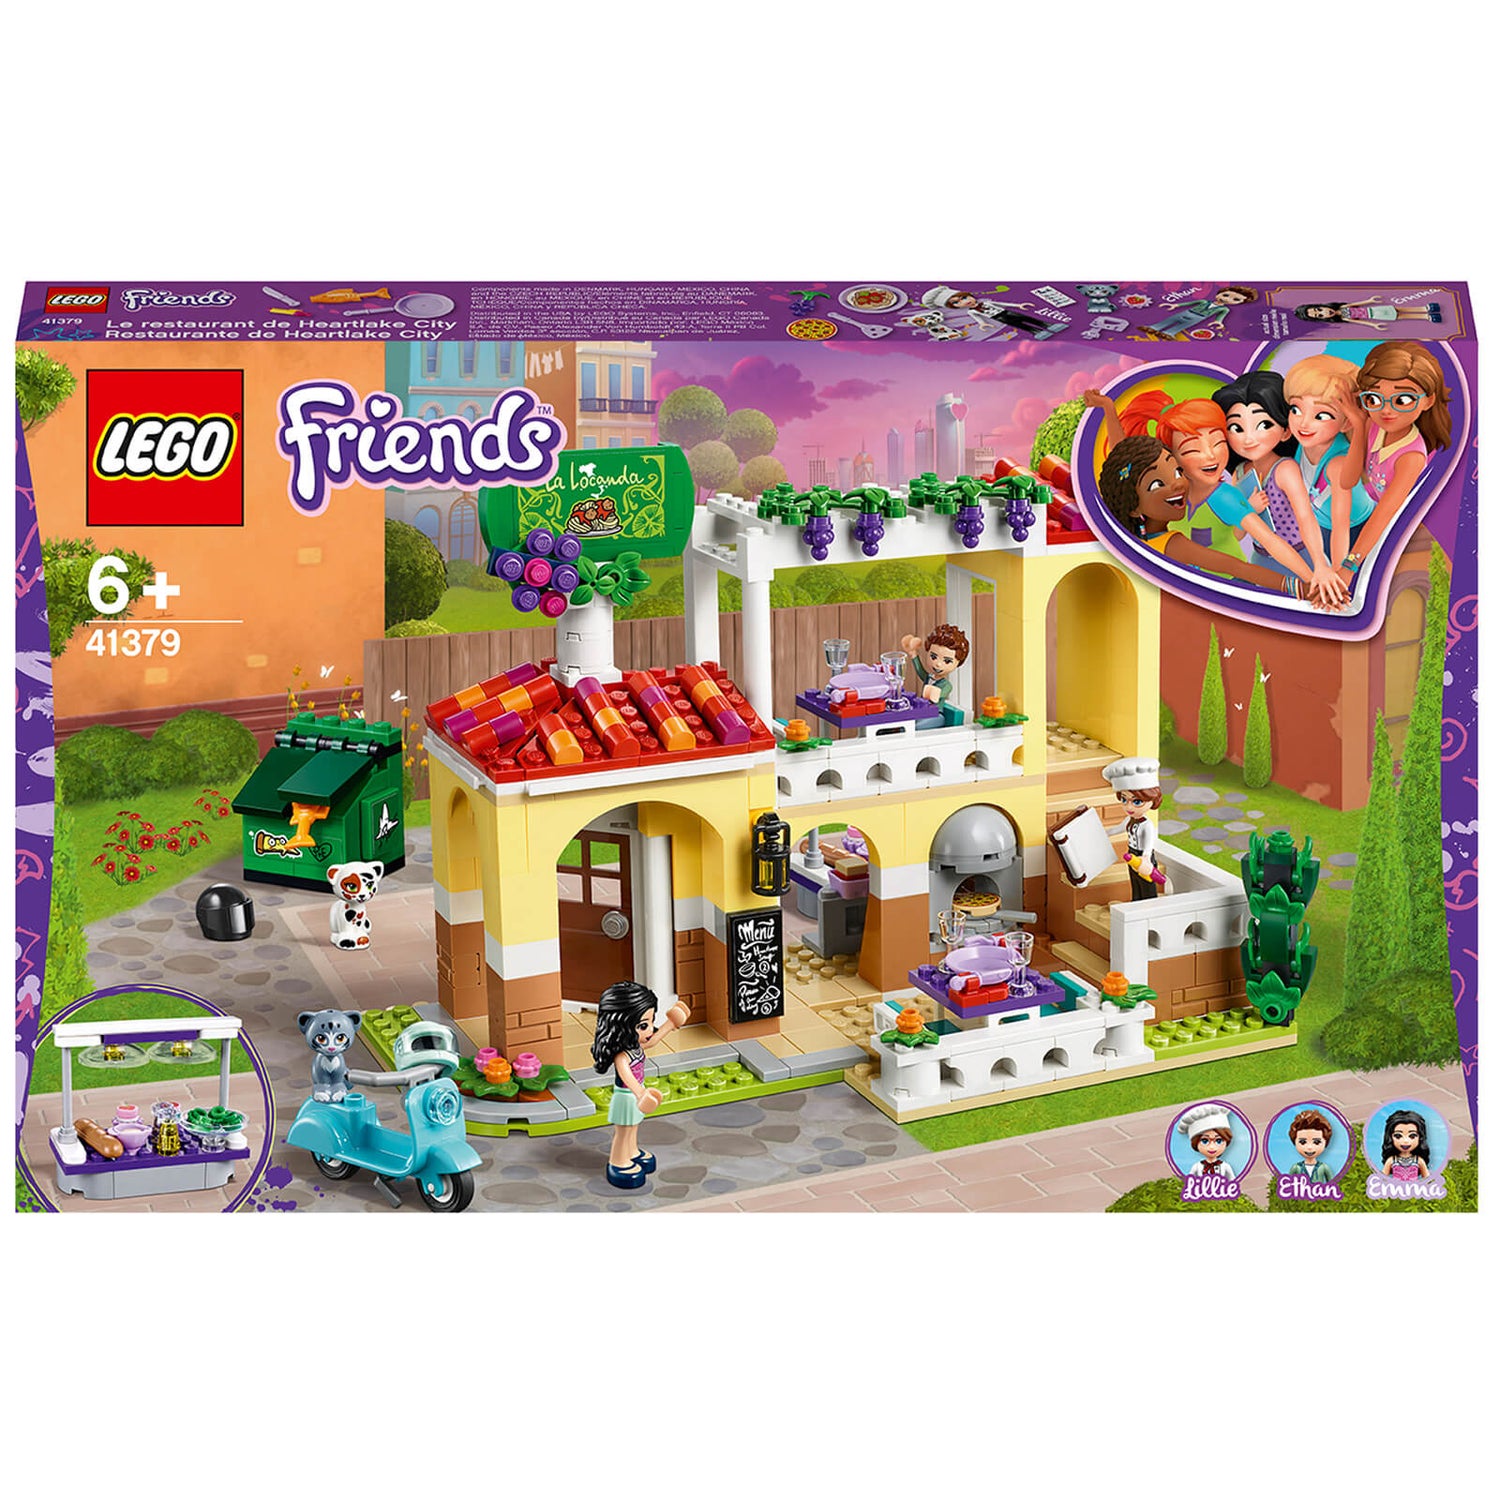 Inside a lego restaurant or bar in fire in manga style with 3 chef